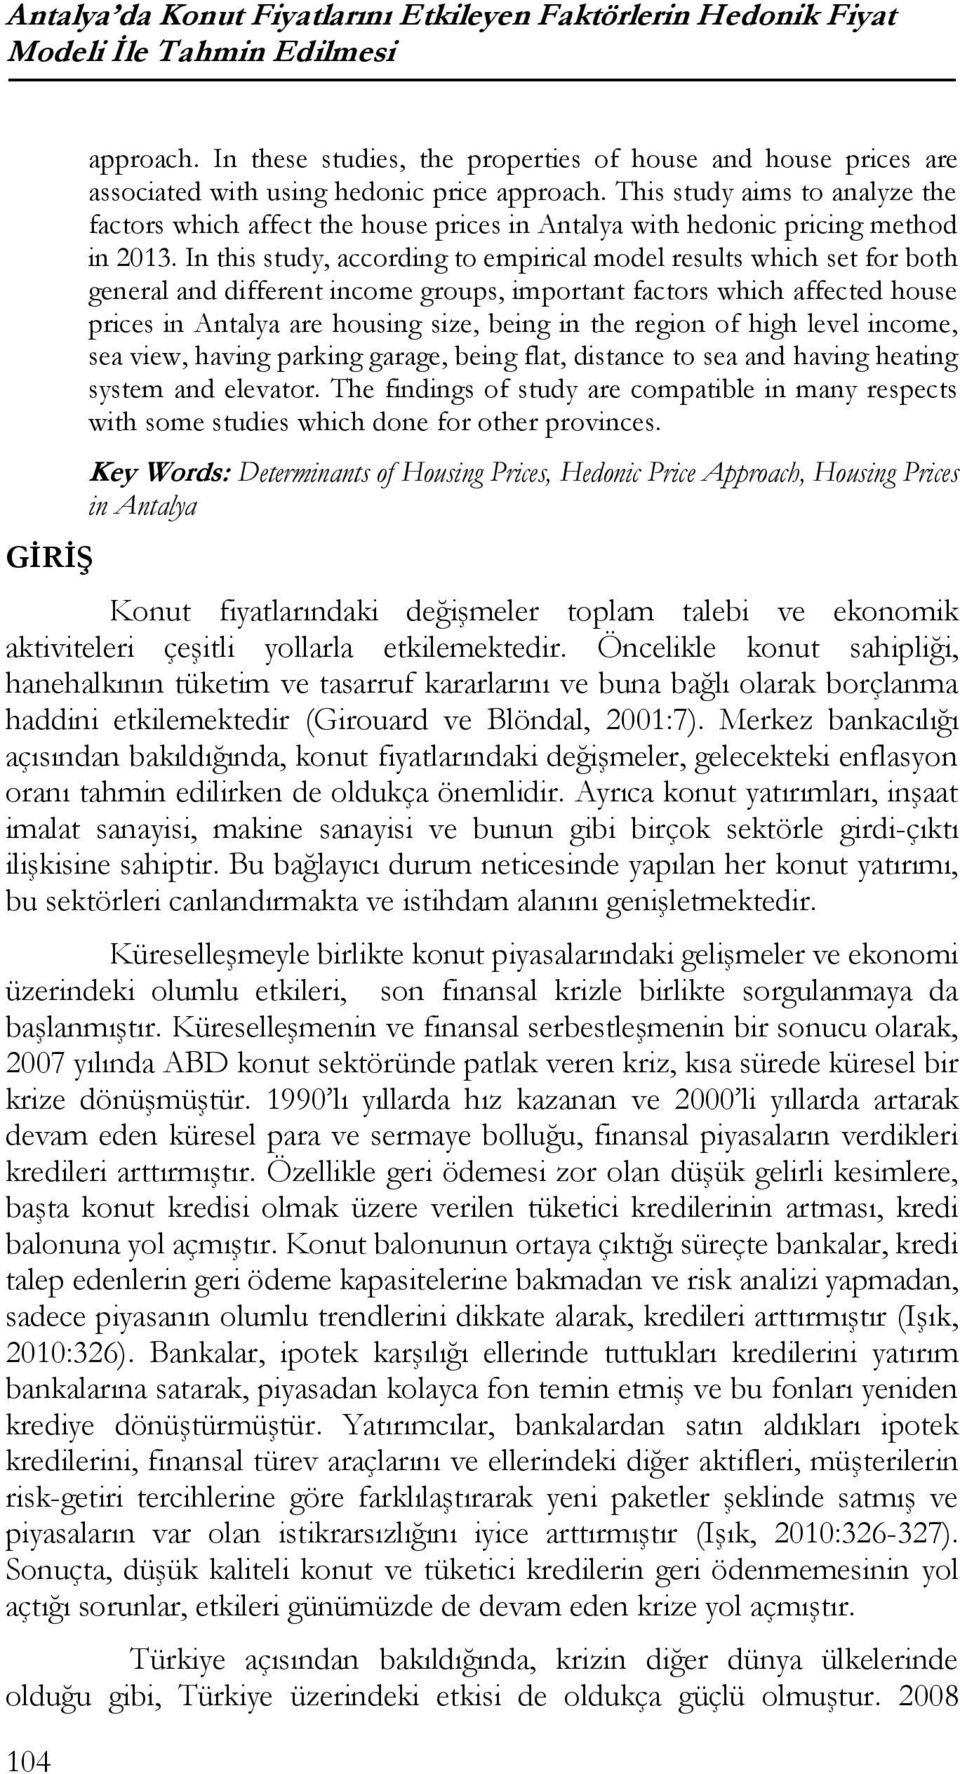 This study aims to analyze the factors which affect the house prices in Antalya with hedonic pricing method in 2013.